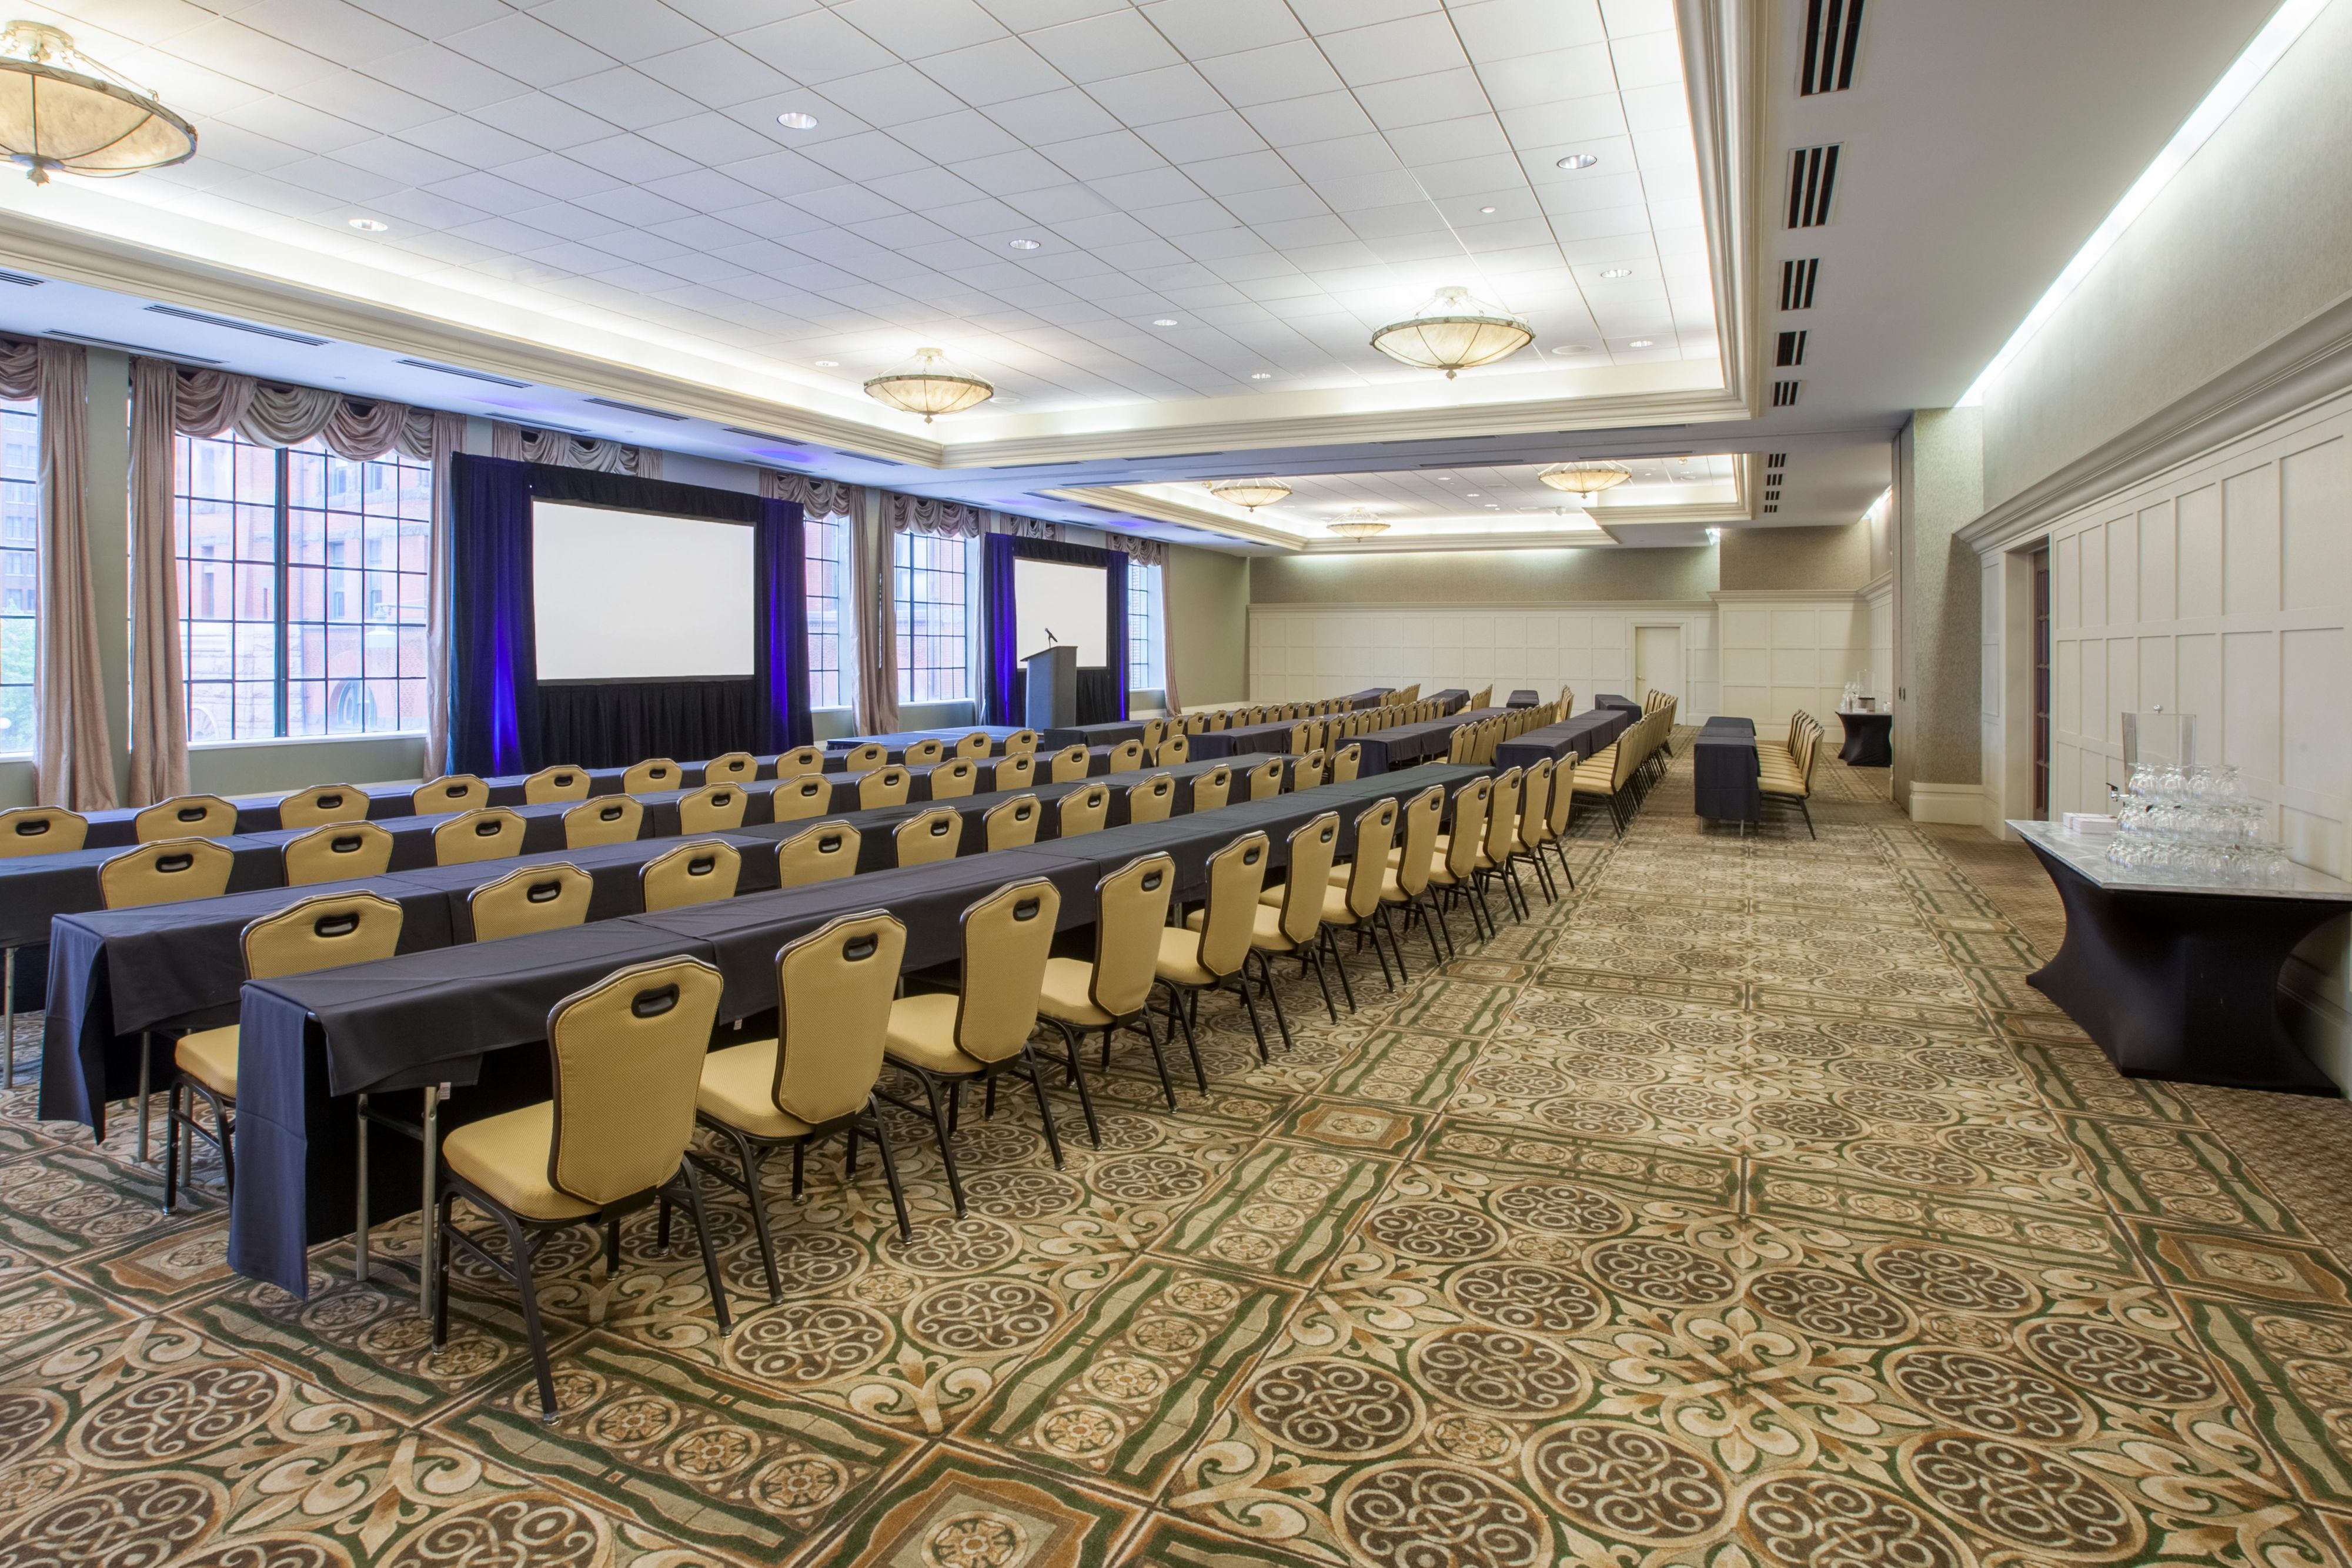 A modern space perfect for your business meetings.